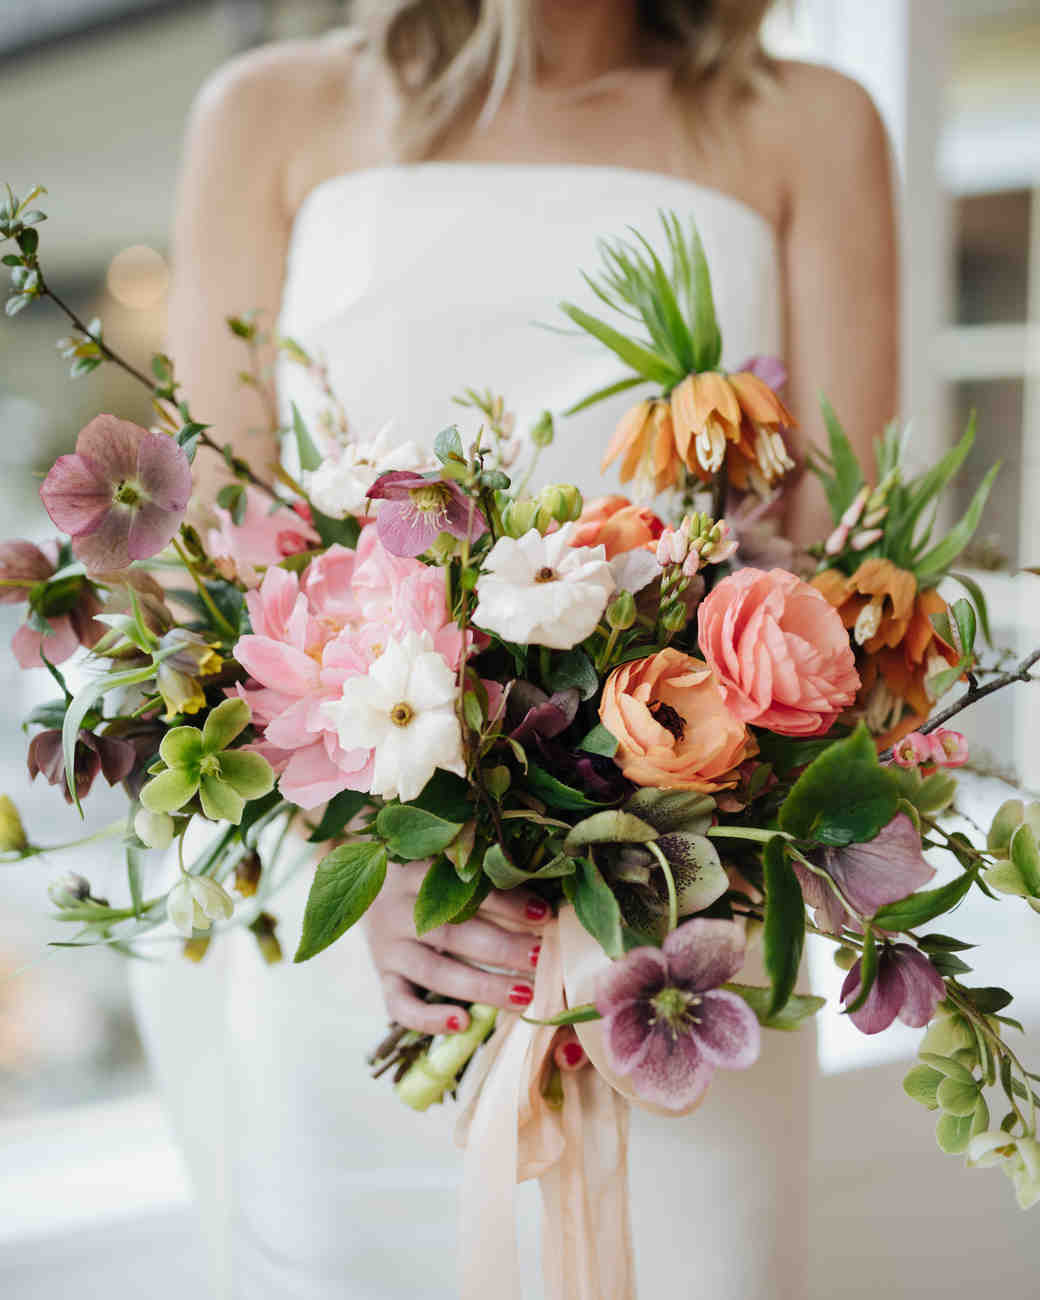 Spring Flowers For Weddings
 52 Ideas for Your Spring Wedding Bouquet